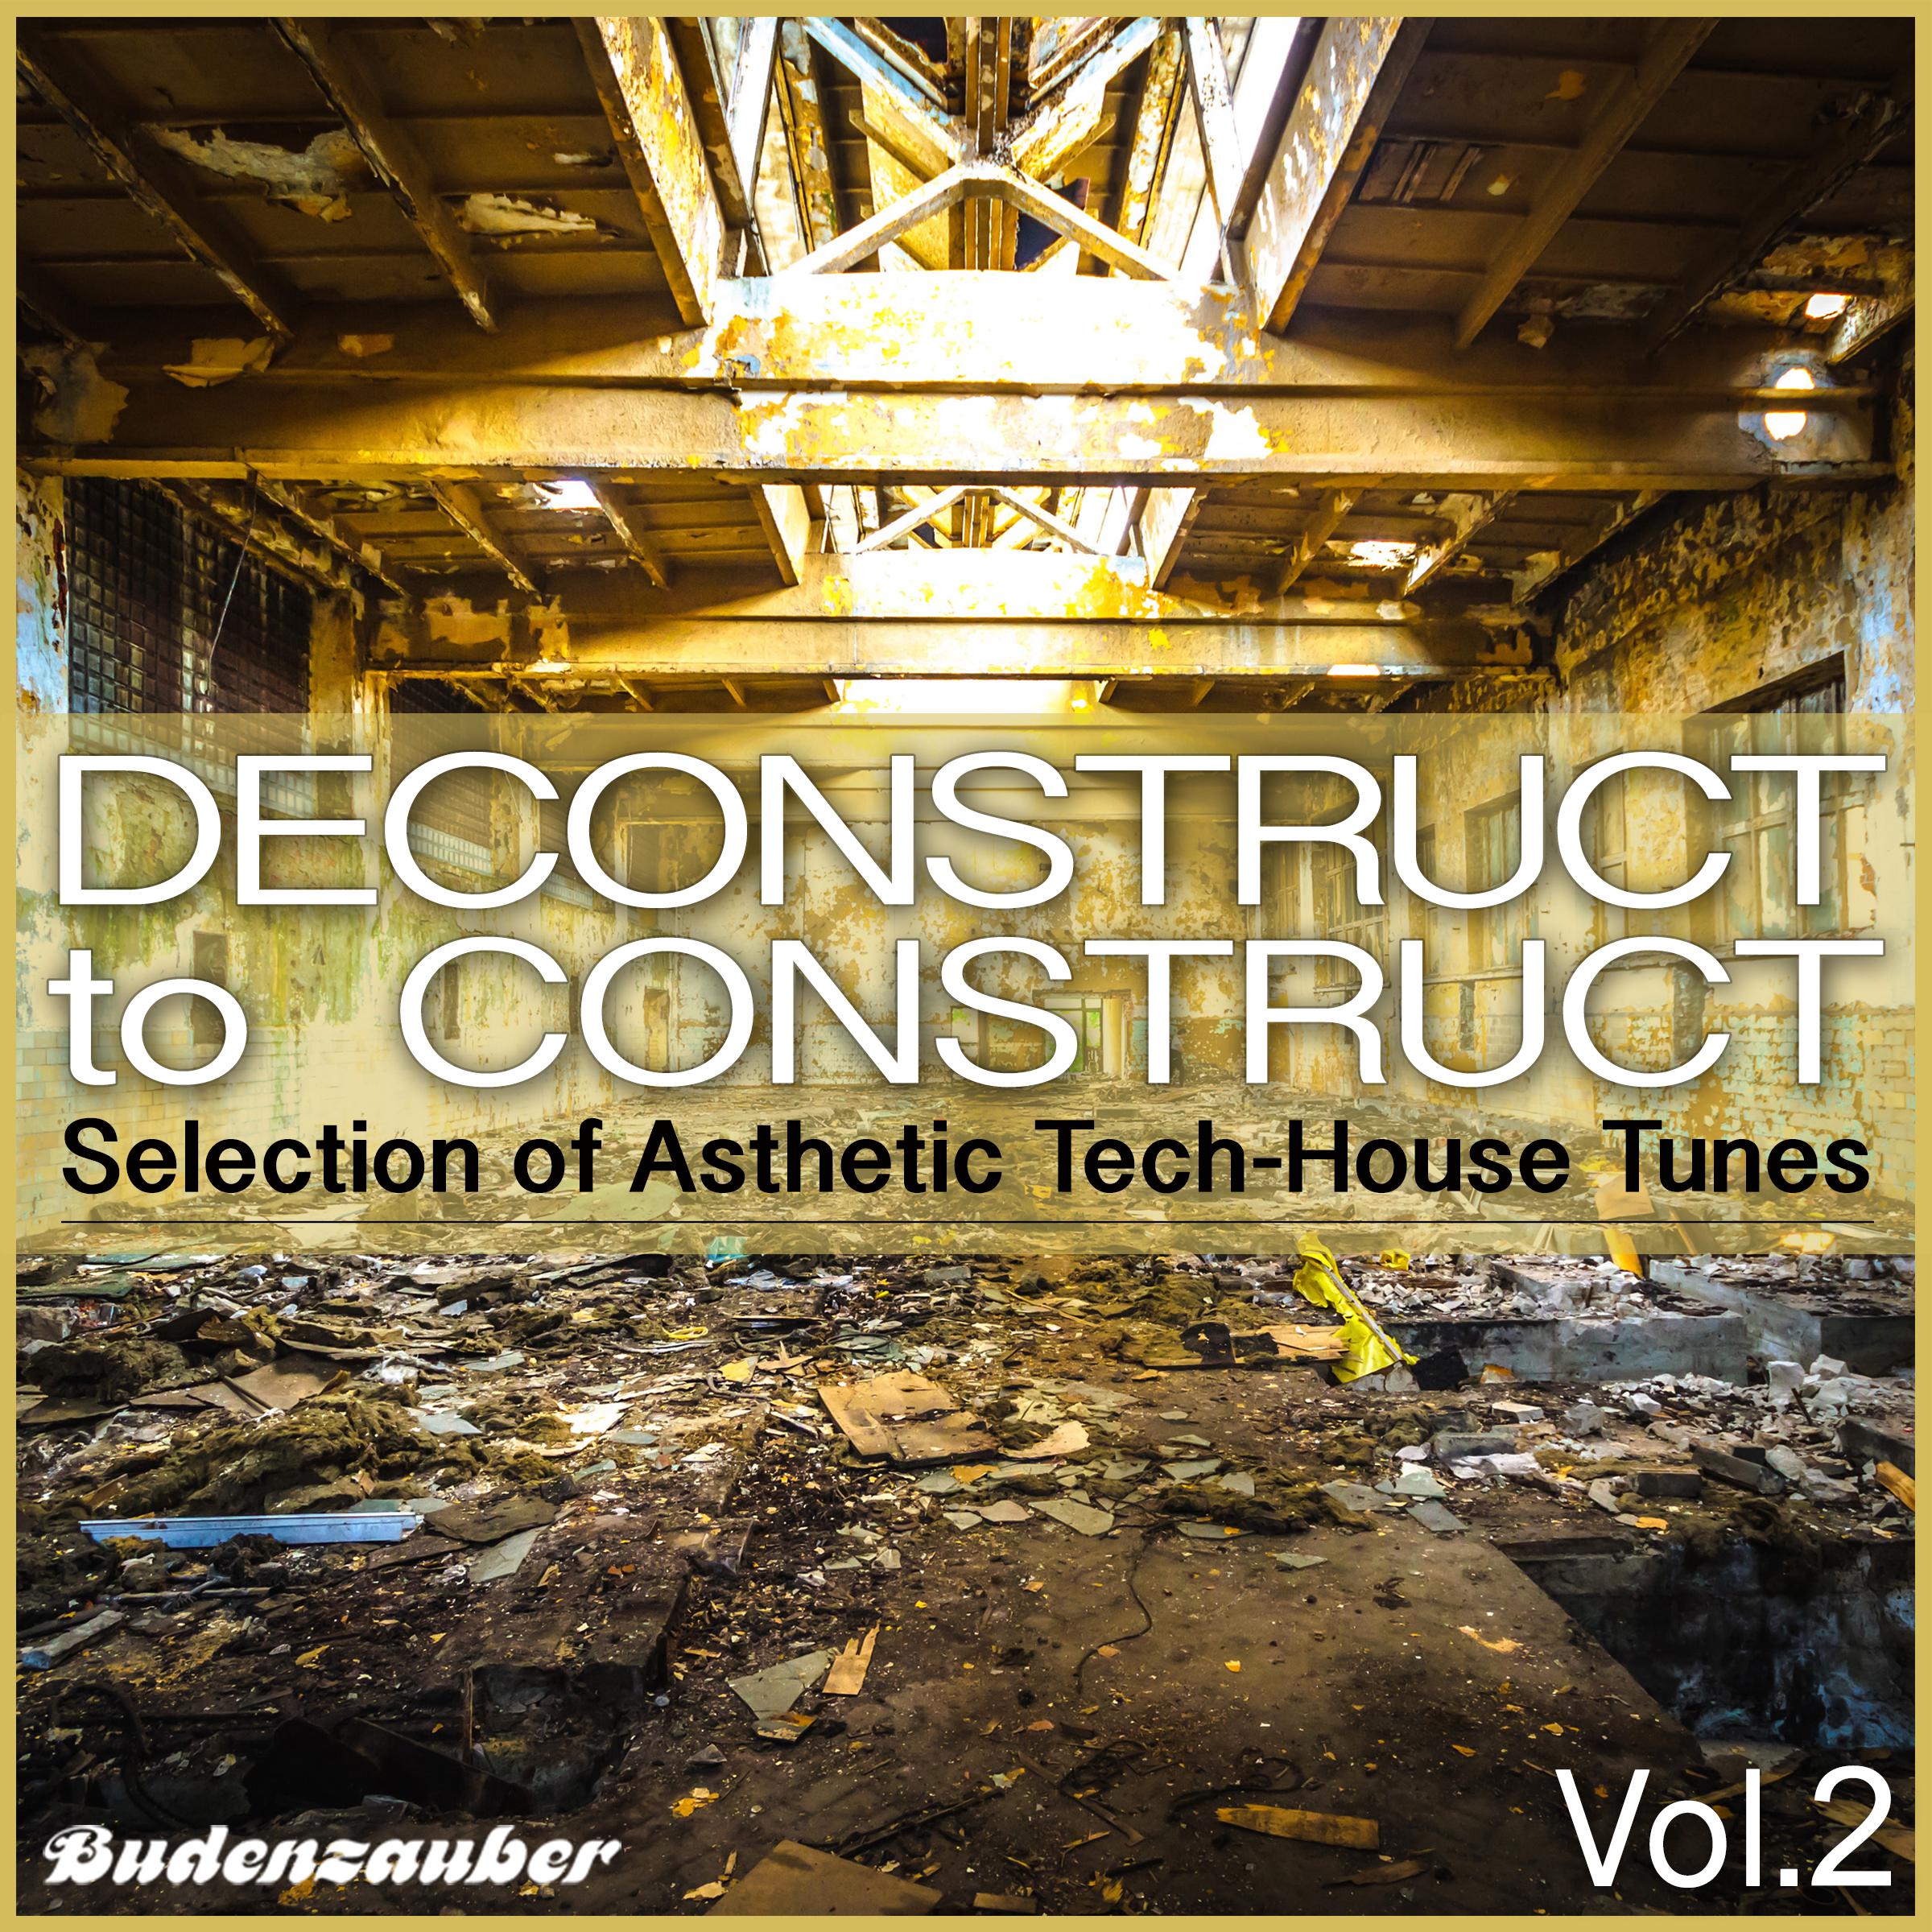 Deconstruct to Construct, Vol. 2 - Selection of Asthetic Tech-House Tunes